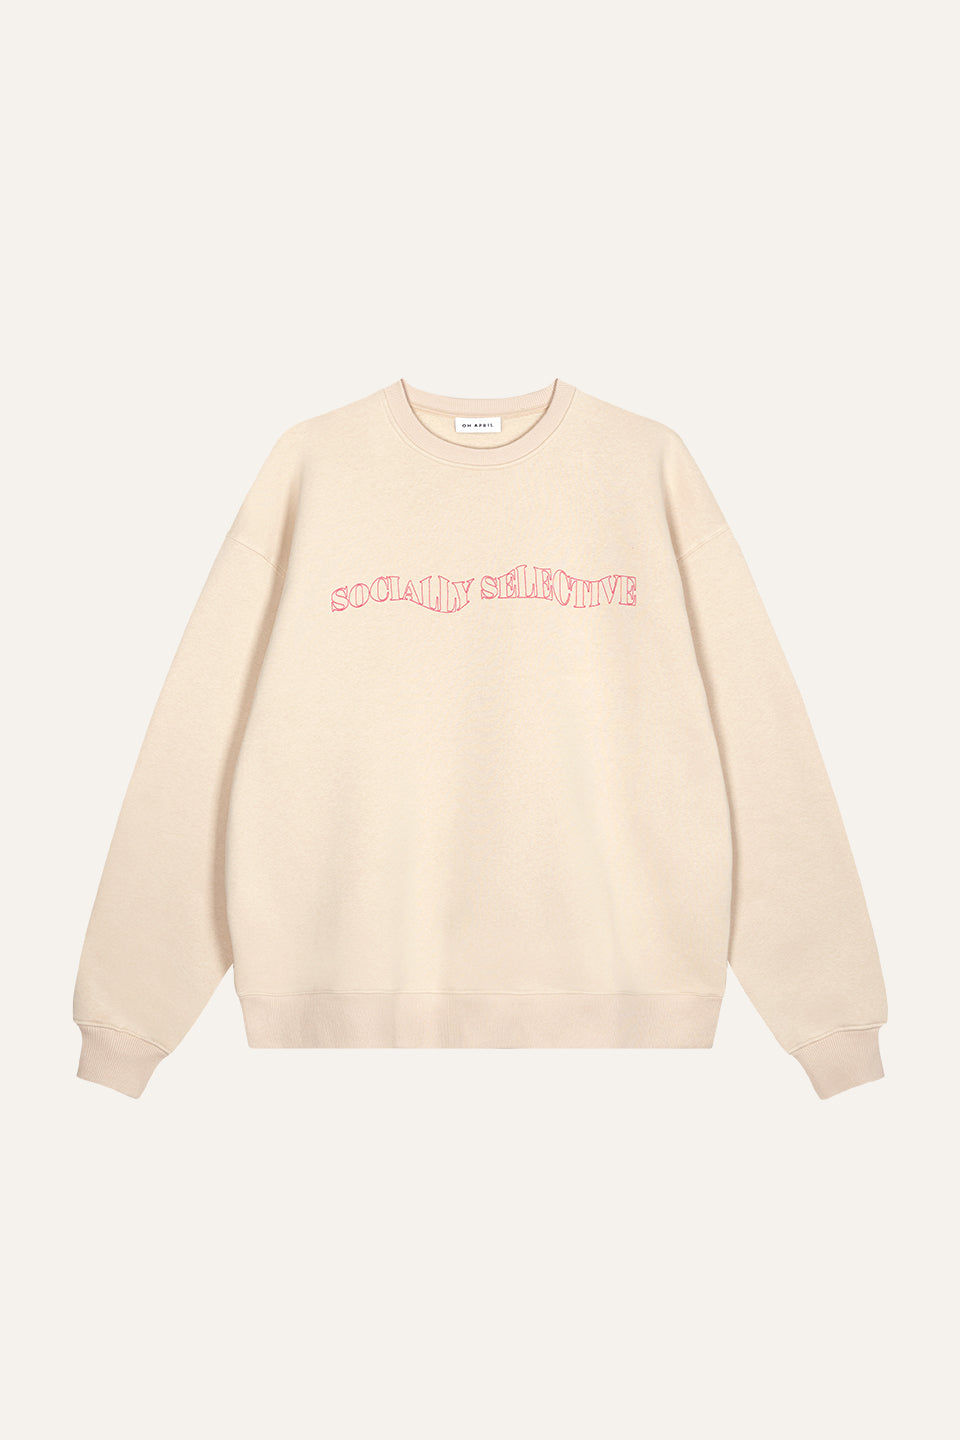 Oversized Sweater Cappuccino Socially Selective